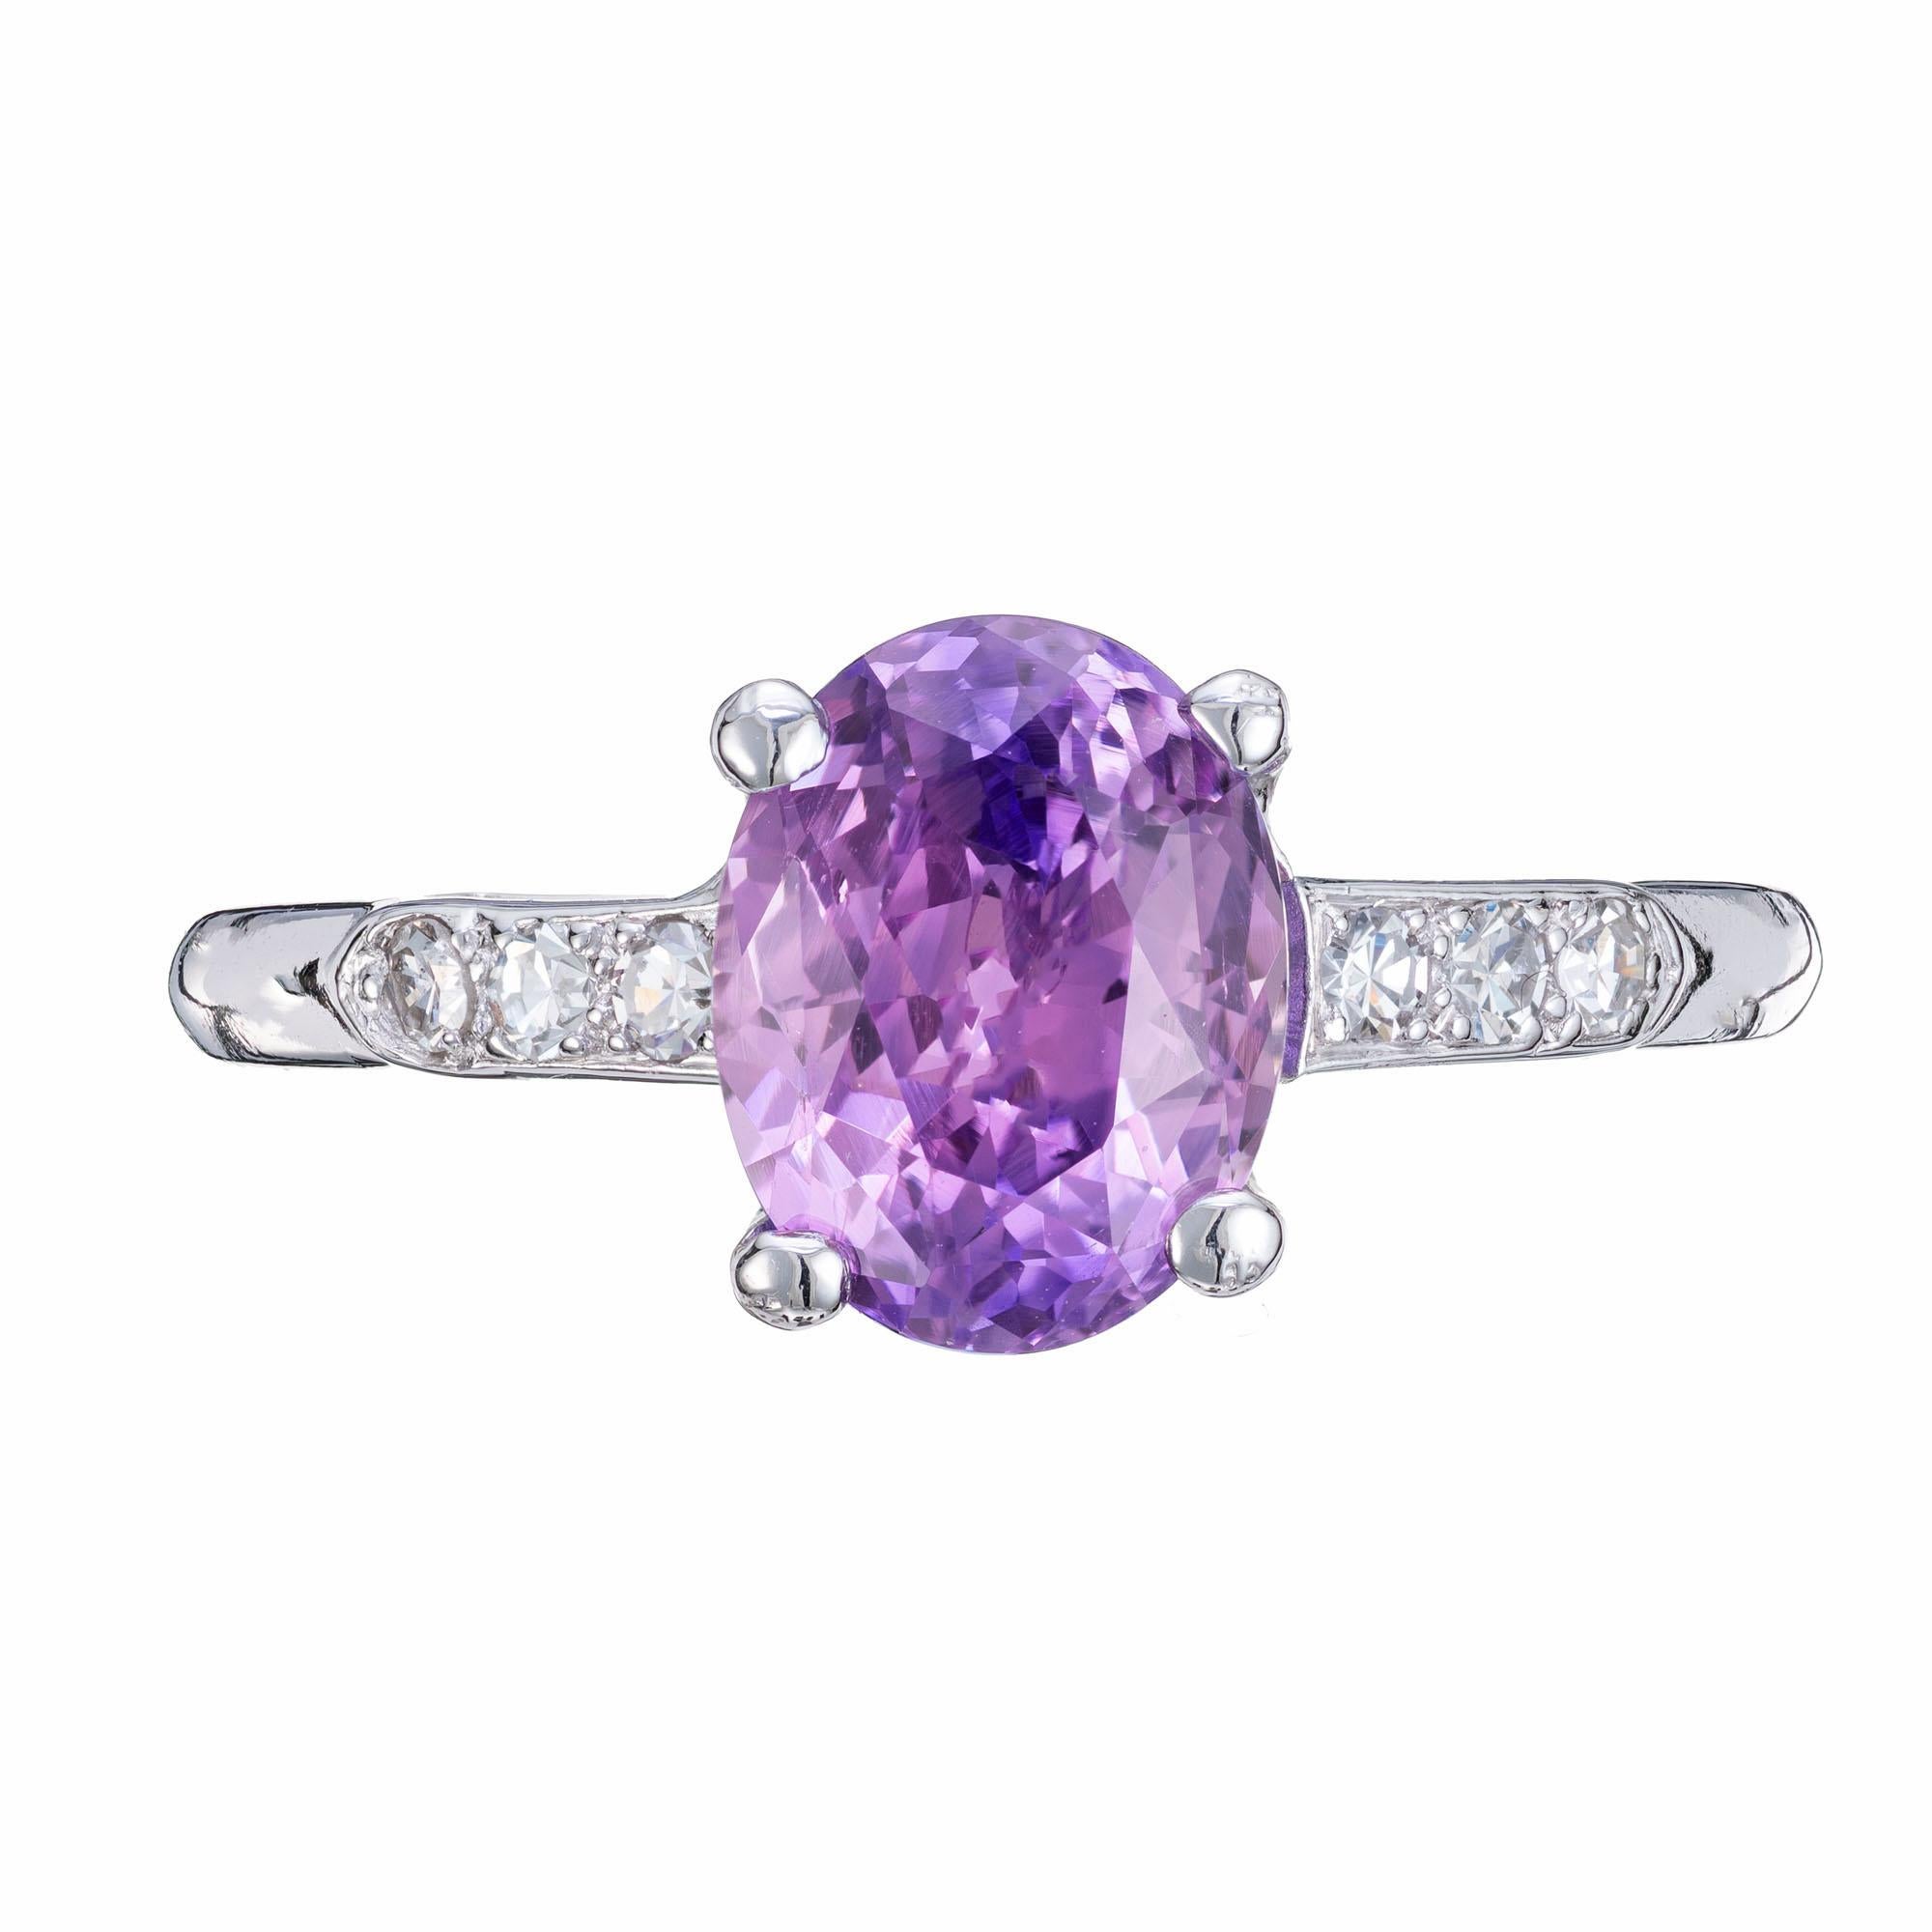 1930's late Art Deco sapphire and diamond engagement ring. GIA certified 2.05ct rich purple oval center sapphire with 6 transitional cut accent diamonds in platinum setting. Natural color change Sapphire, no heat or enhancements. The color changes